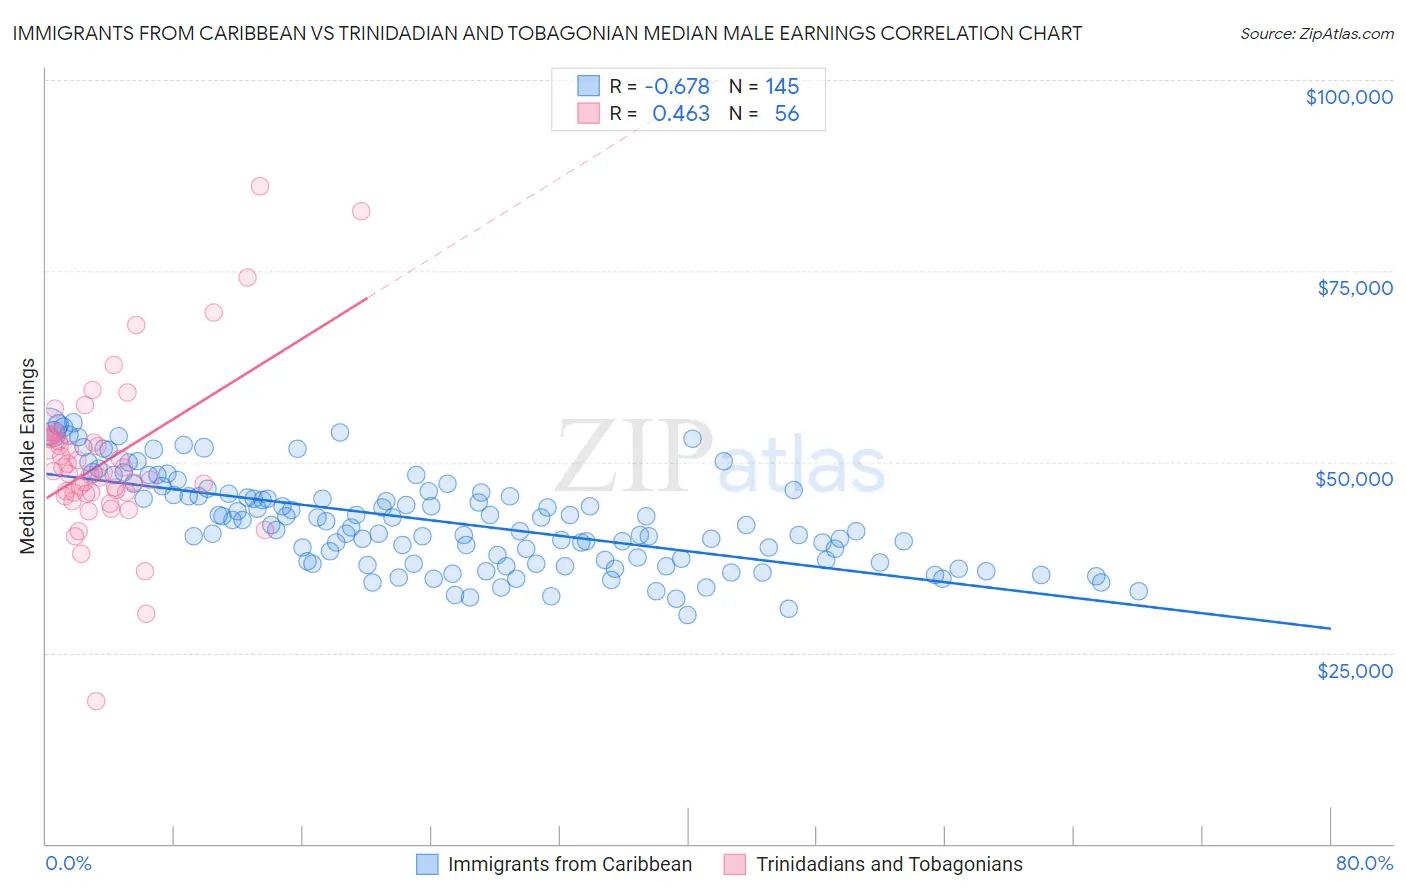 Immigrants from Caribbean vs Trinidadian and Tobagonian Median Male Earnings